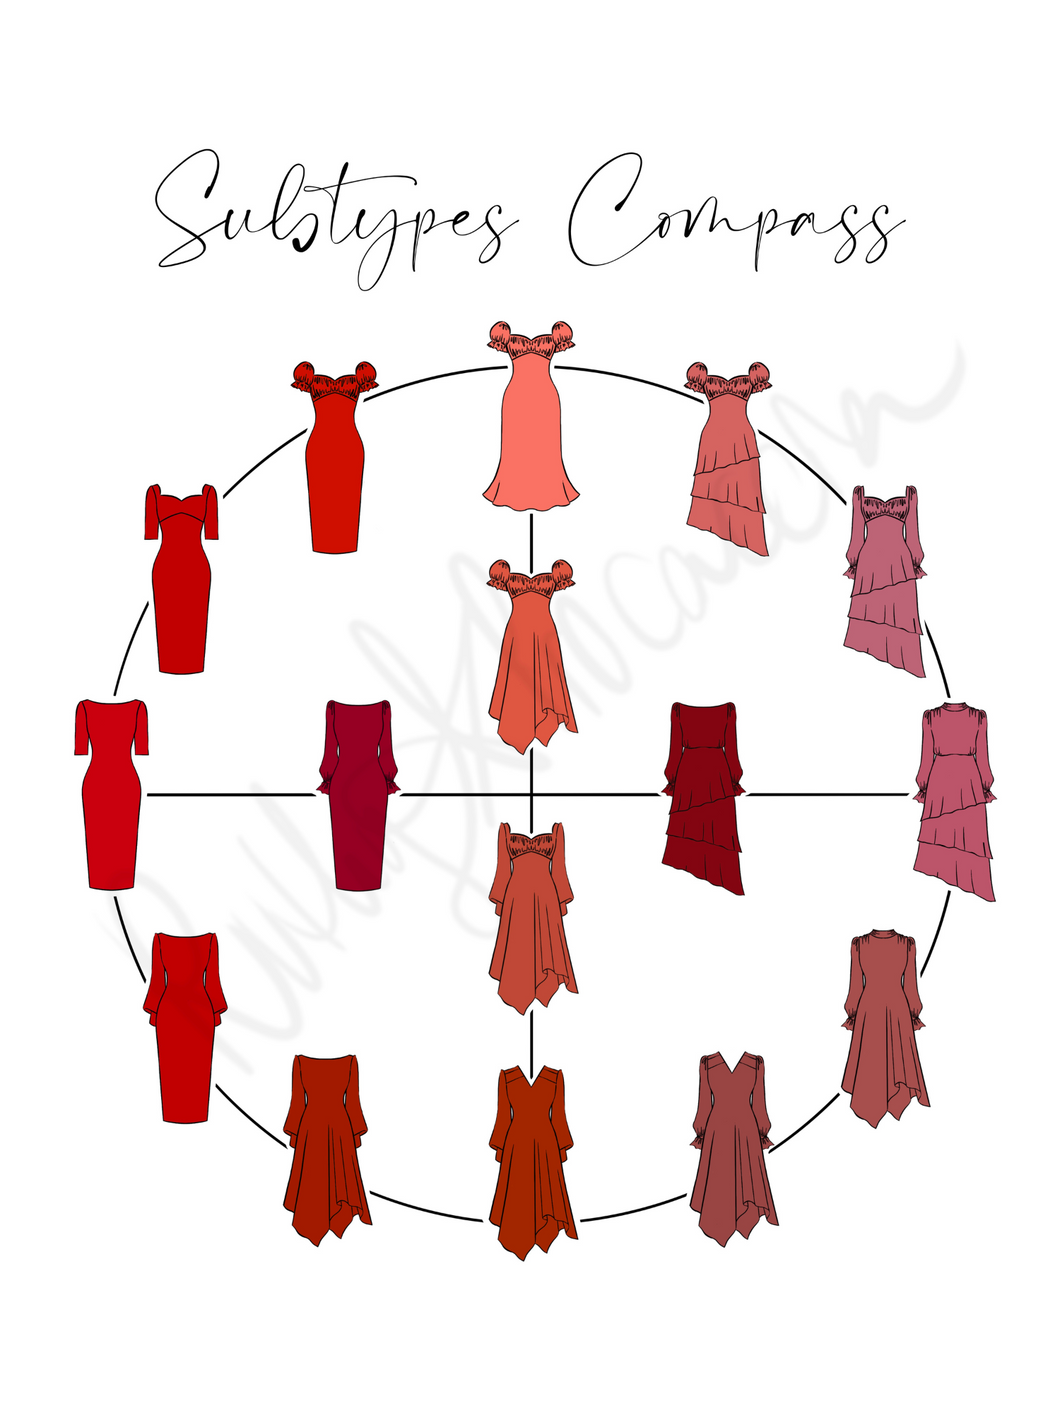 Subtypes Compass: Related Reds